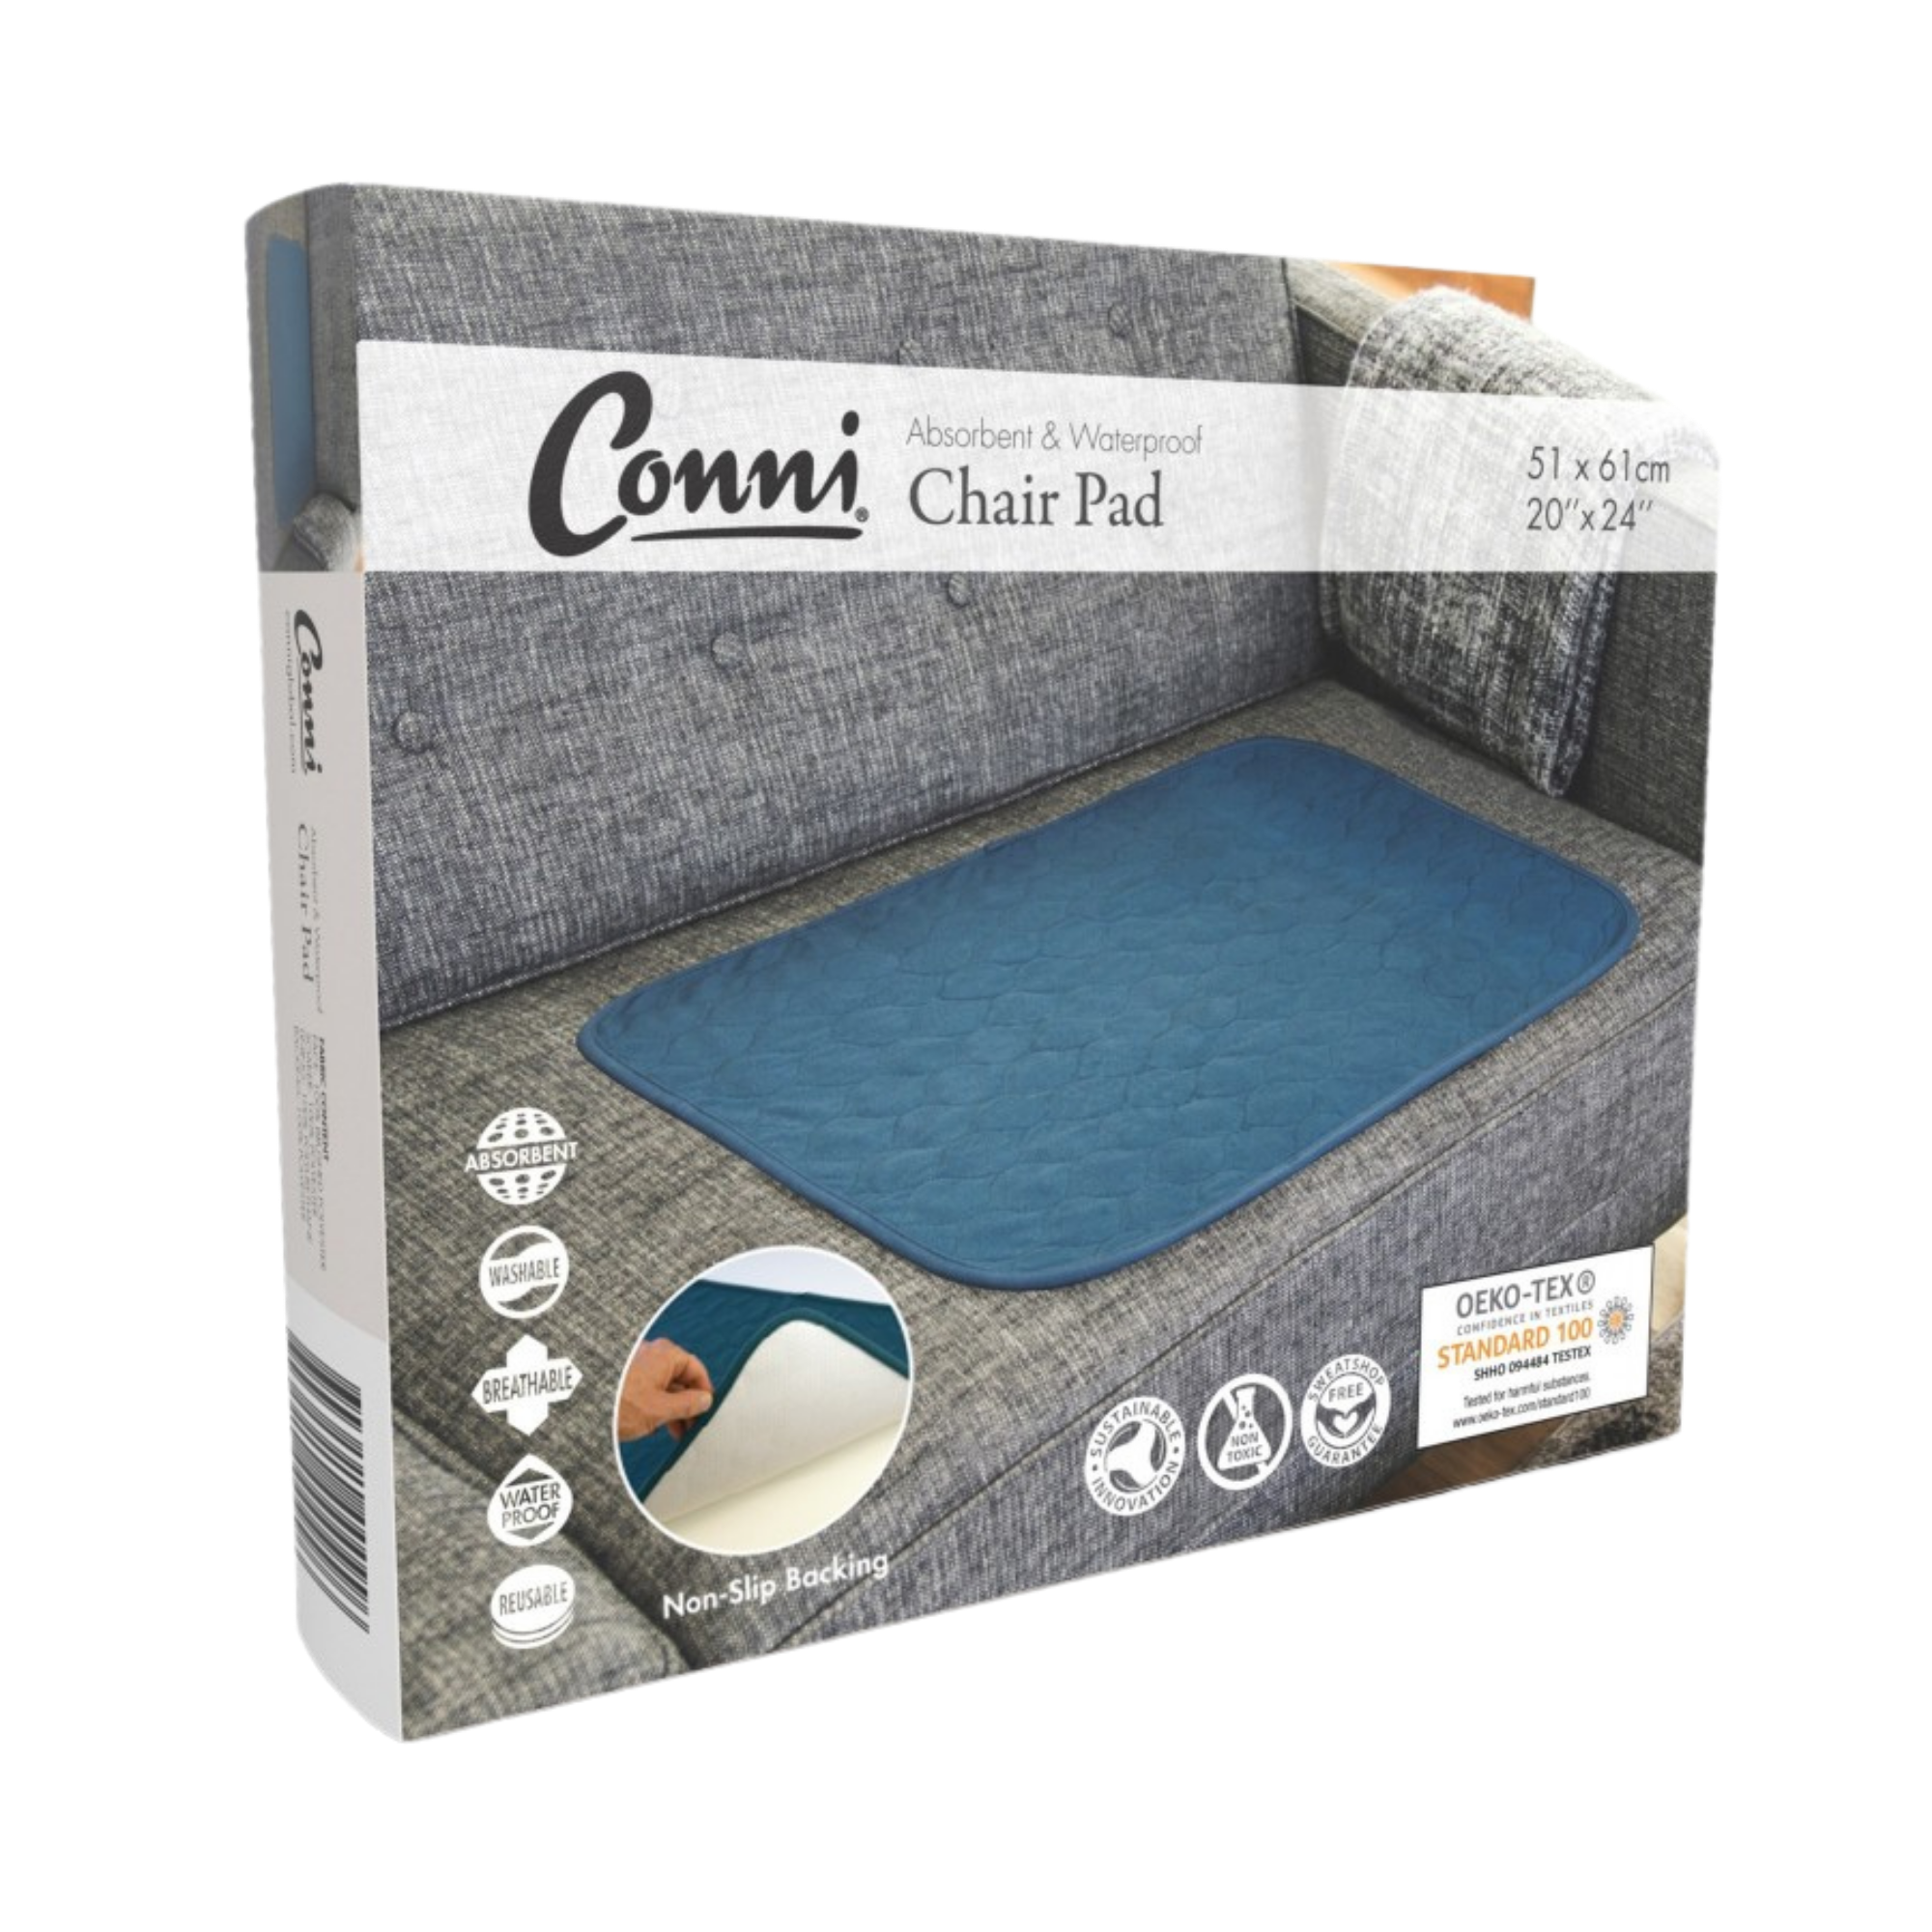 Conni Chair Pad Large Teal Blue Pads